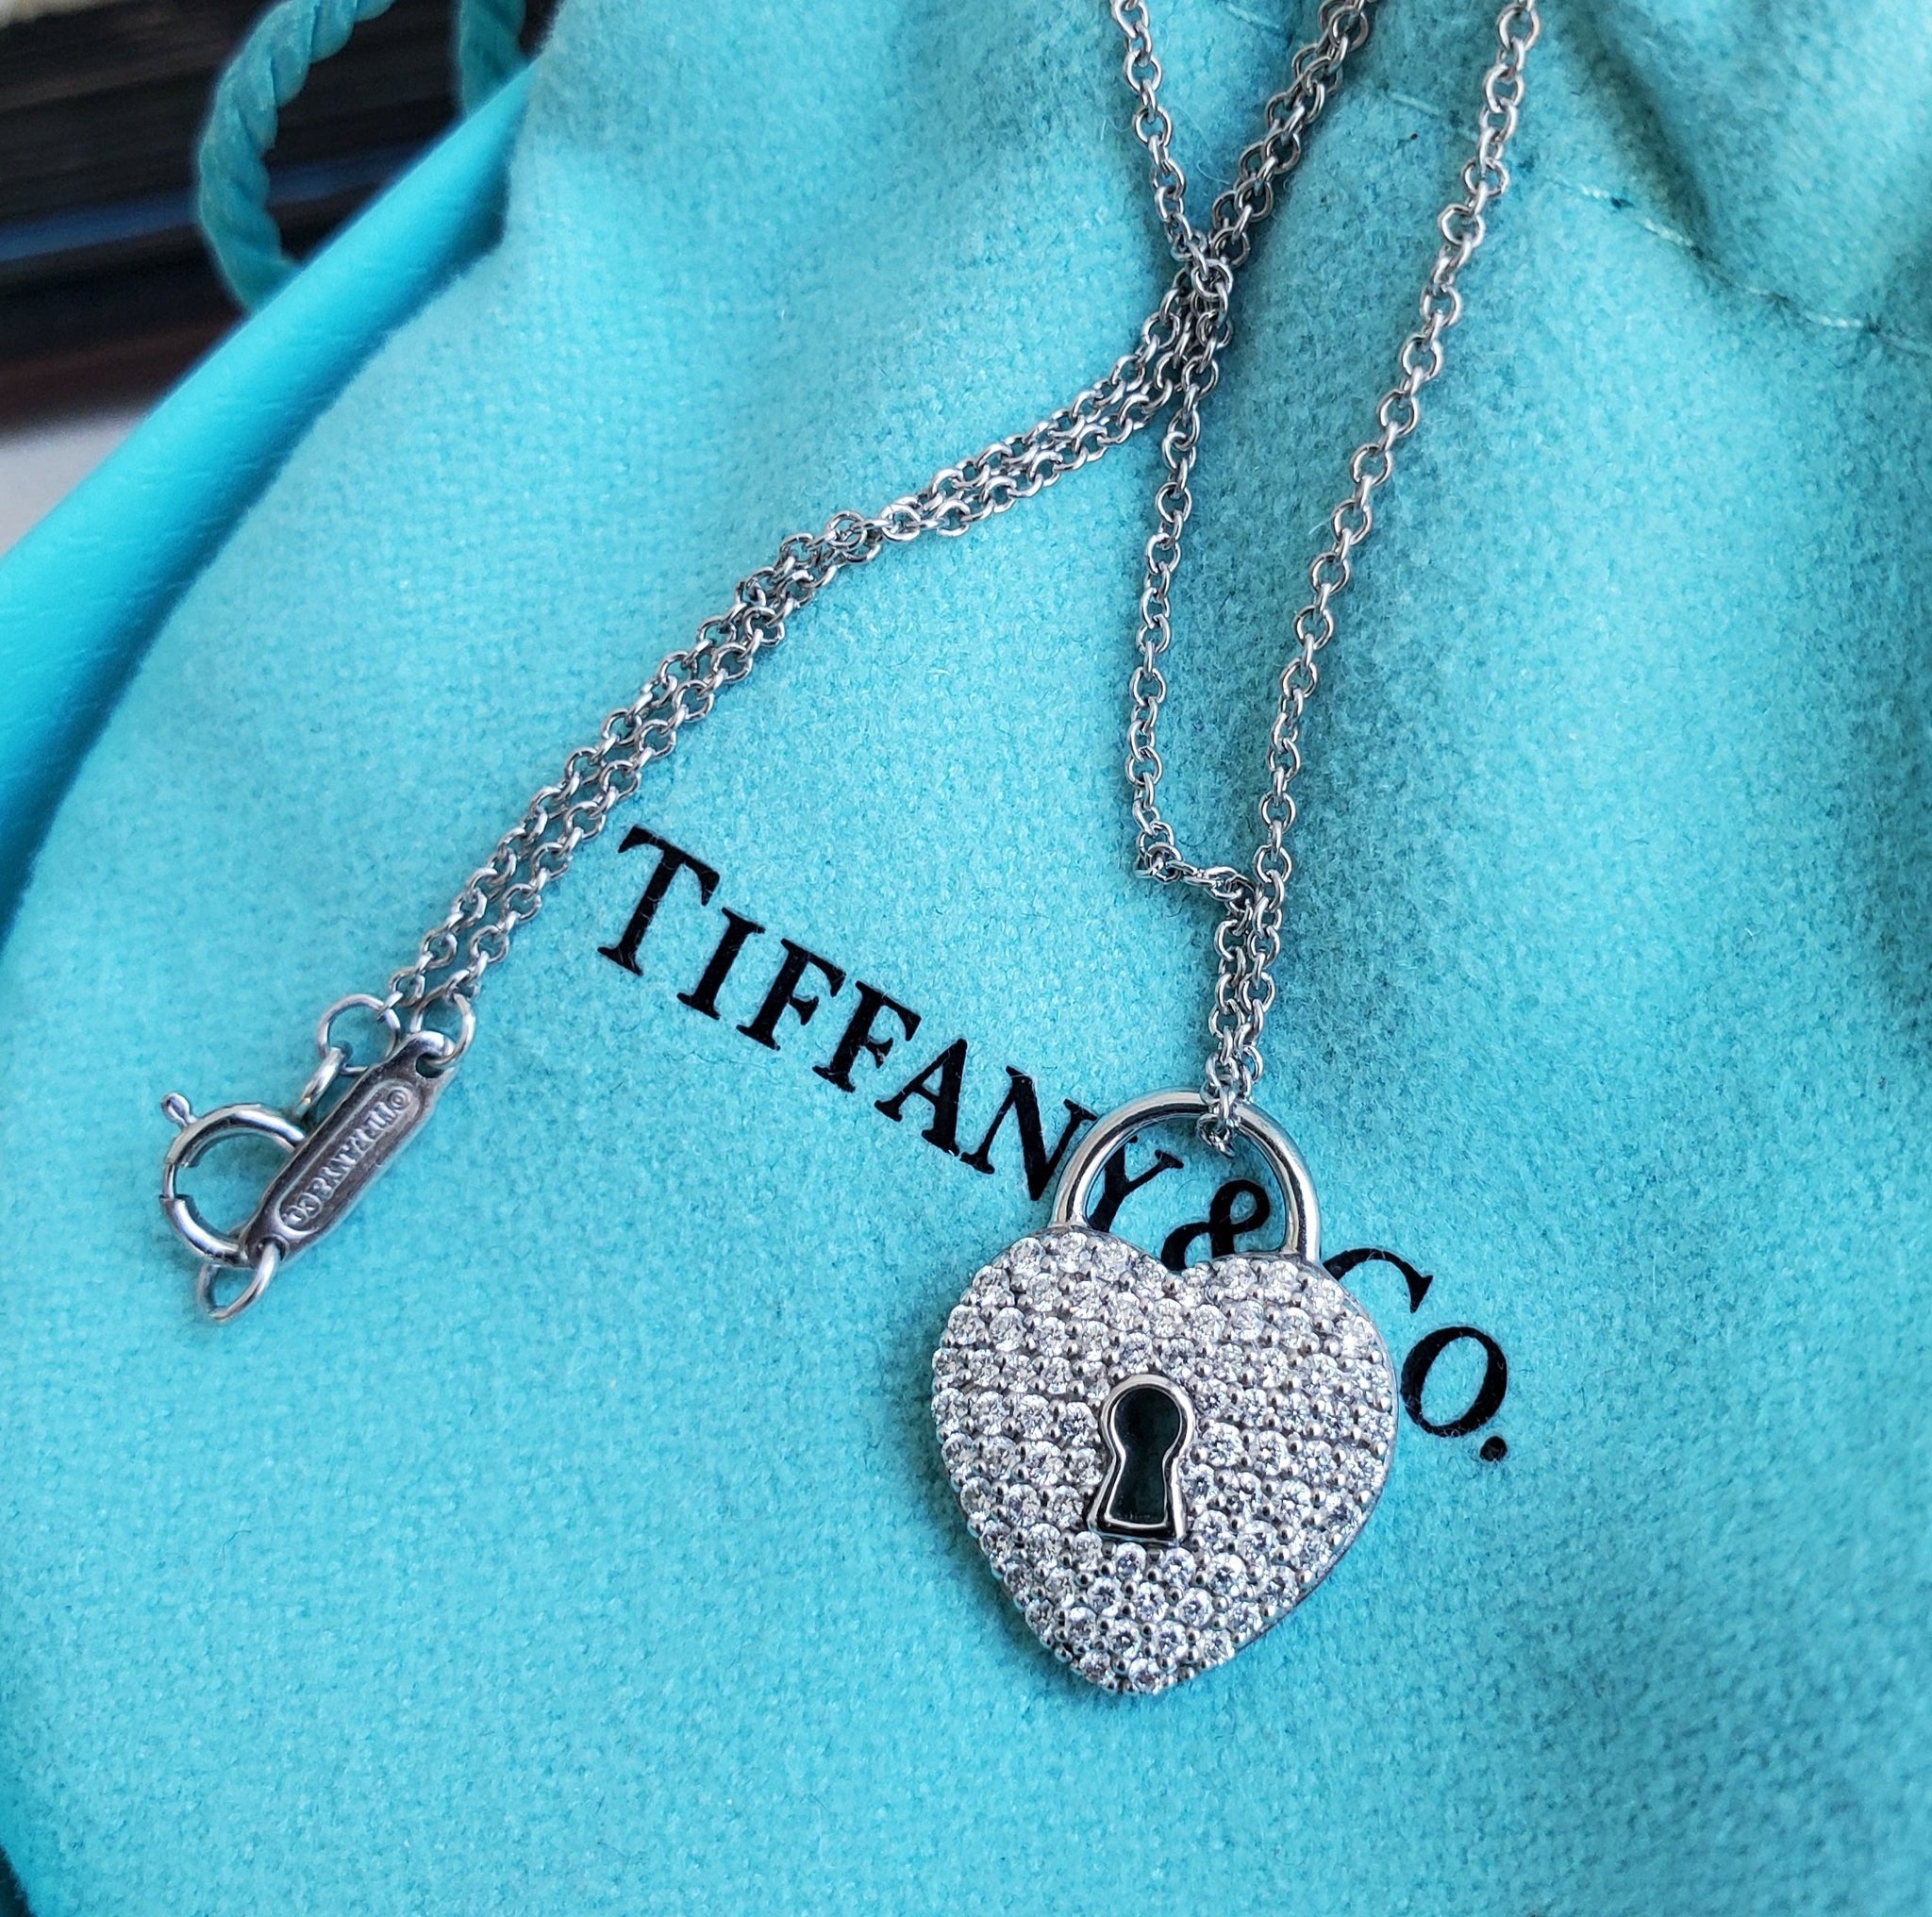 Heart with Lock Pendant Necklace